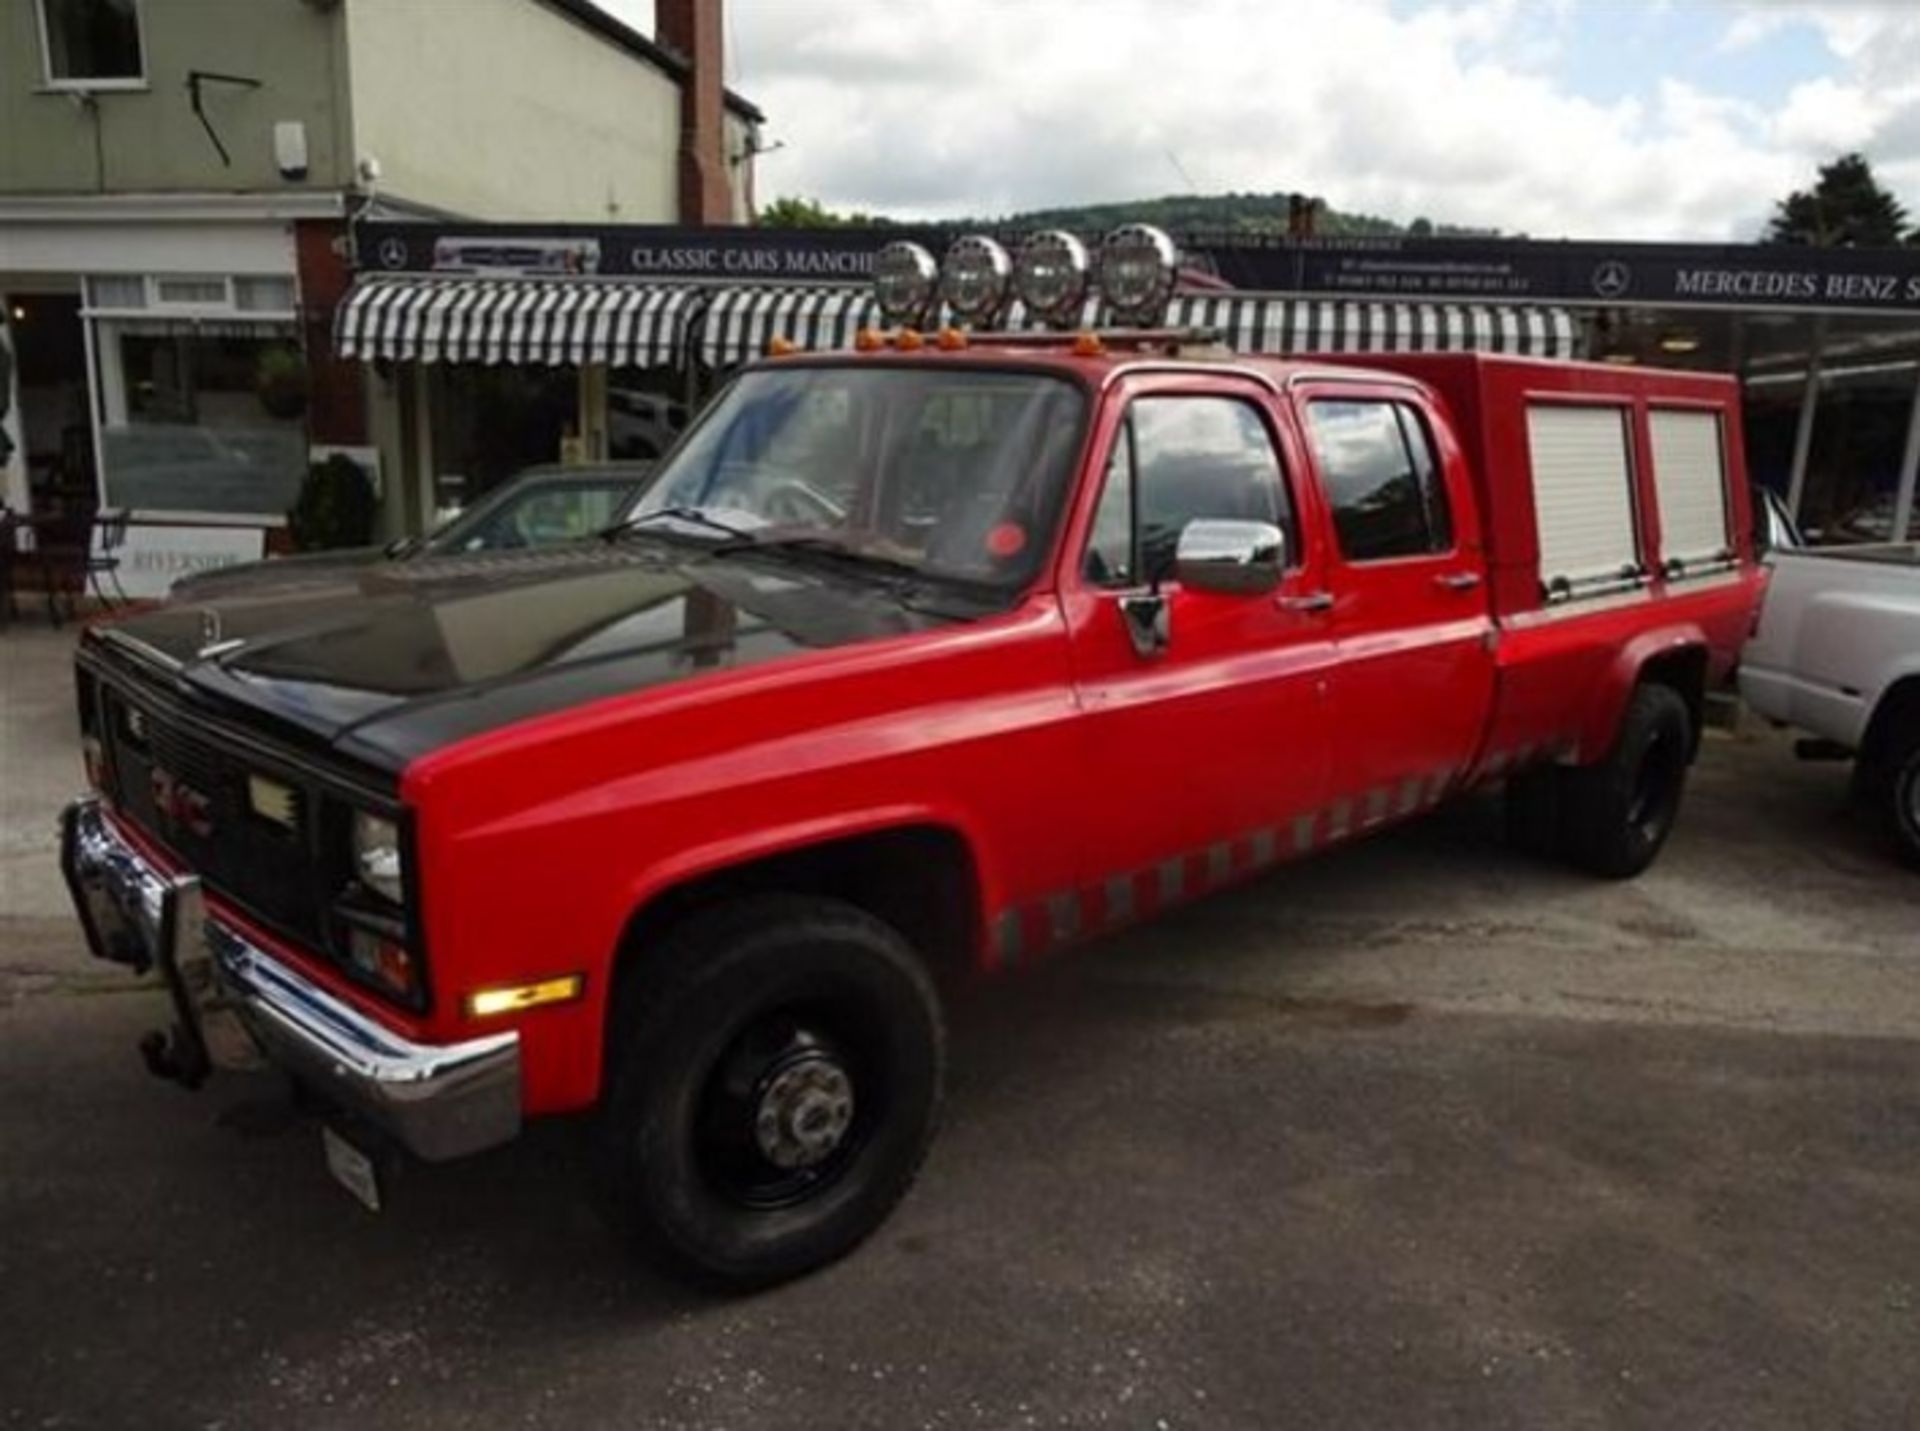 1989 Gmc Chevrolet Fire Truck, 6X6 Diesel 6.2 R.H.D. Auto-Od (Red) - Image 3 of 24